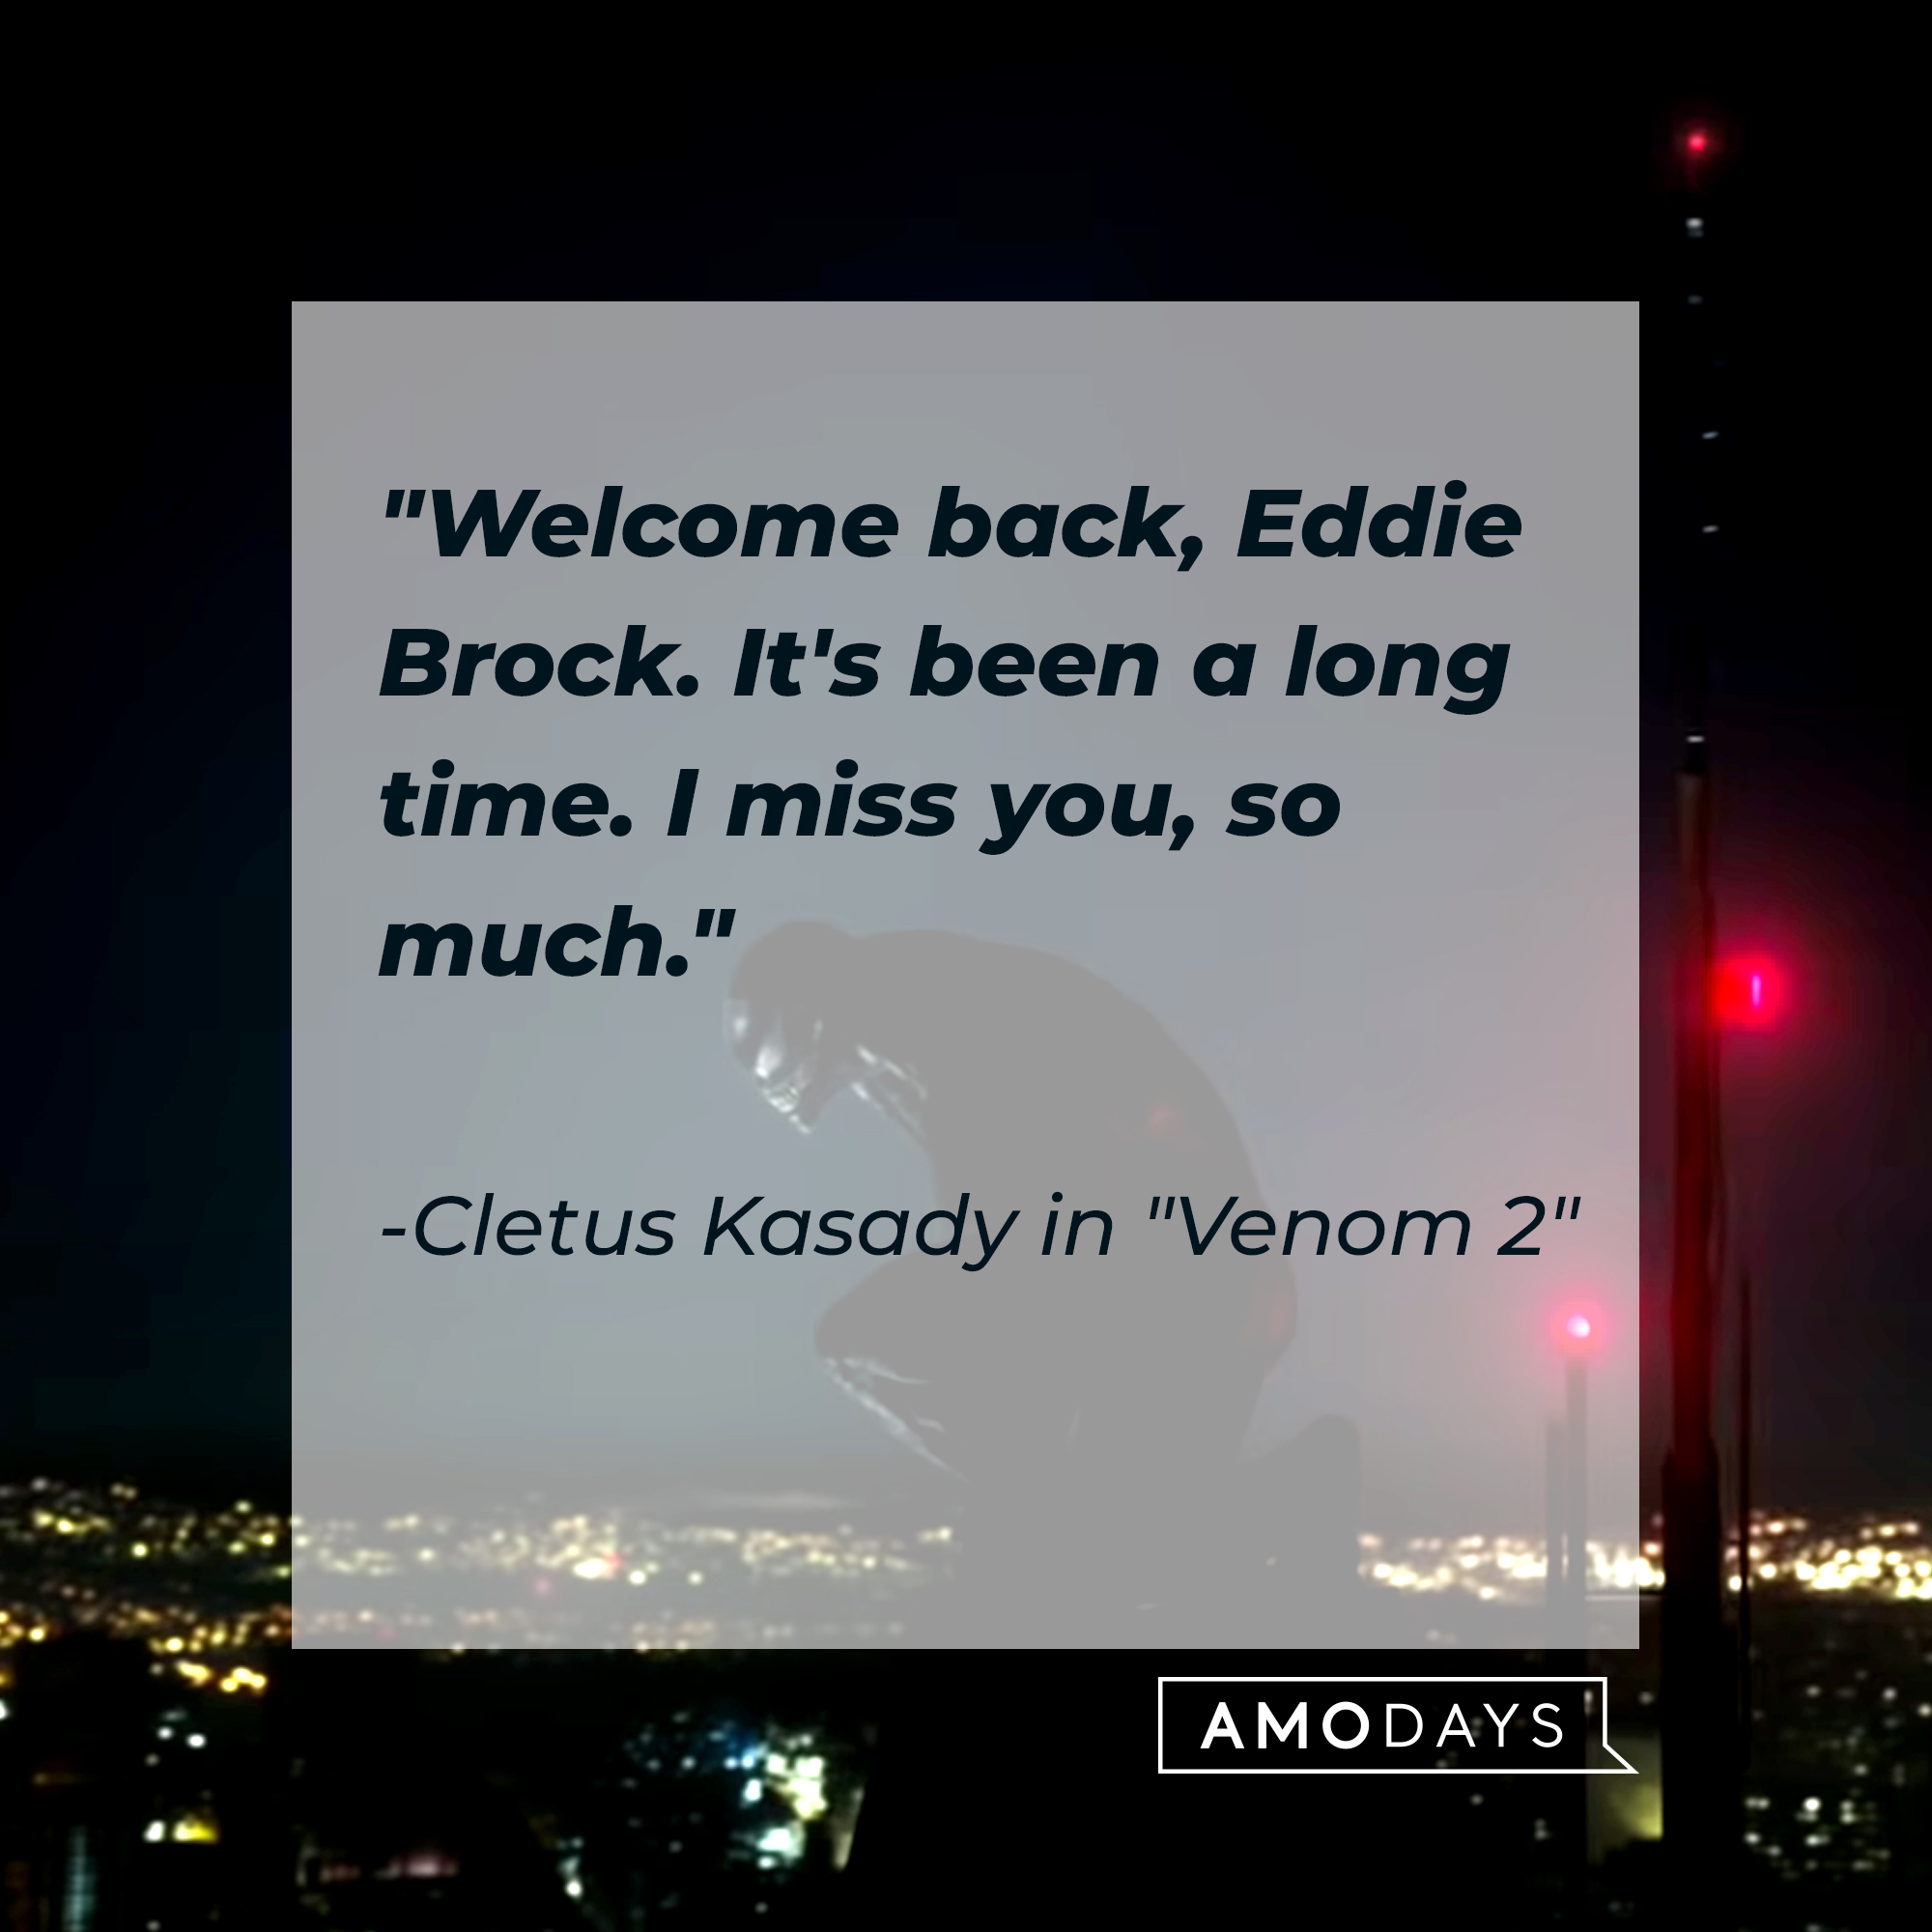 Venom with Cletus Kasady's quote, "Welcome back, Eddie Brock. It's been a long time. I miss you, so much." | Source: YouTube/sonypictures